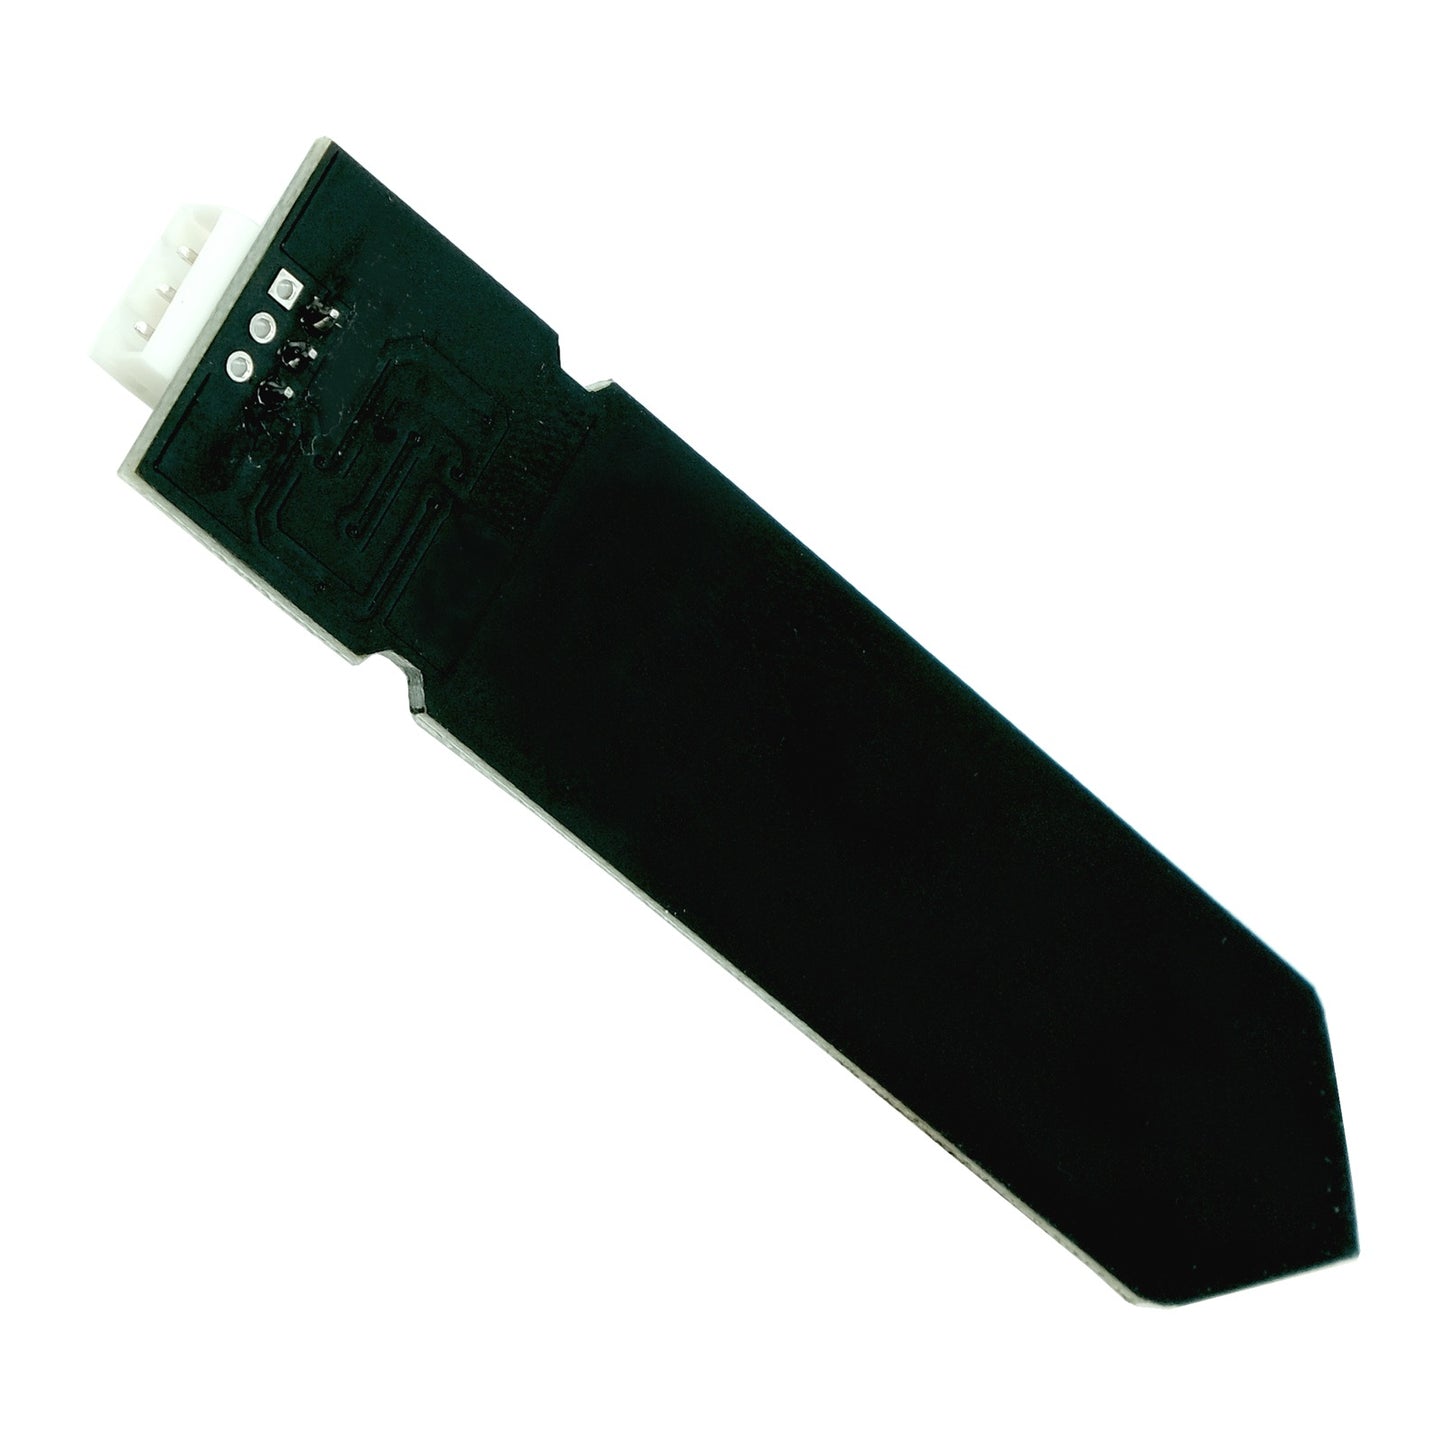 Capacitive Soil Moisture Sensor with Cable, Analog Output